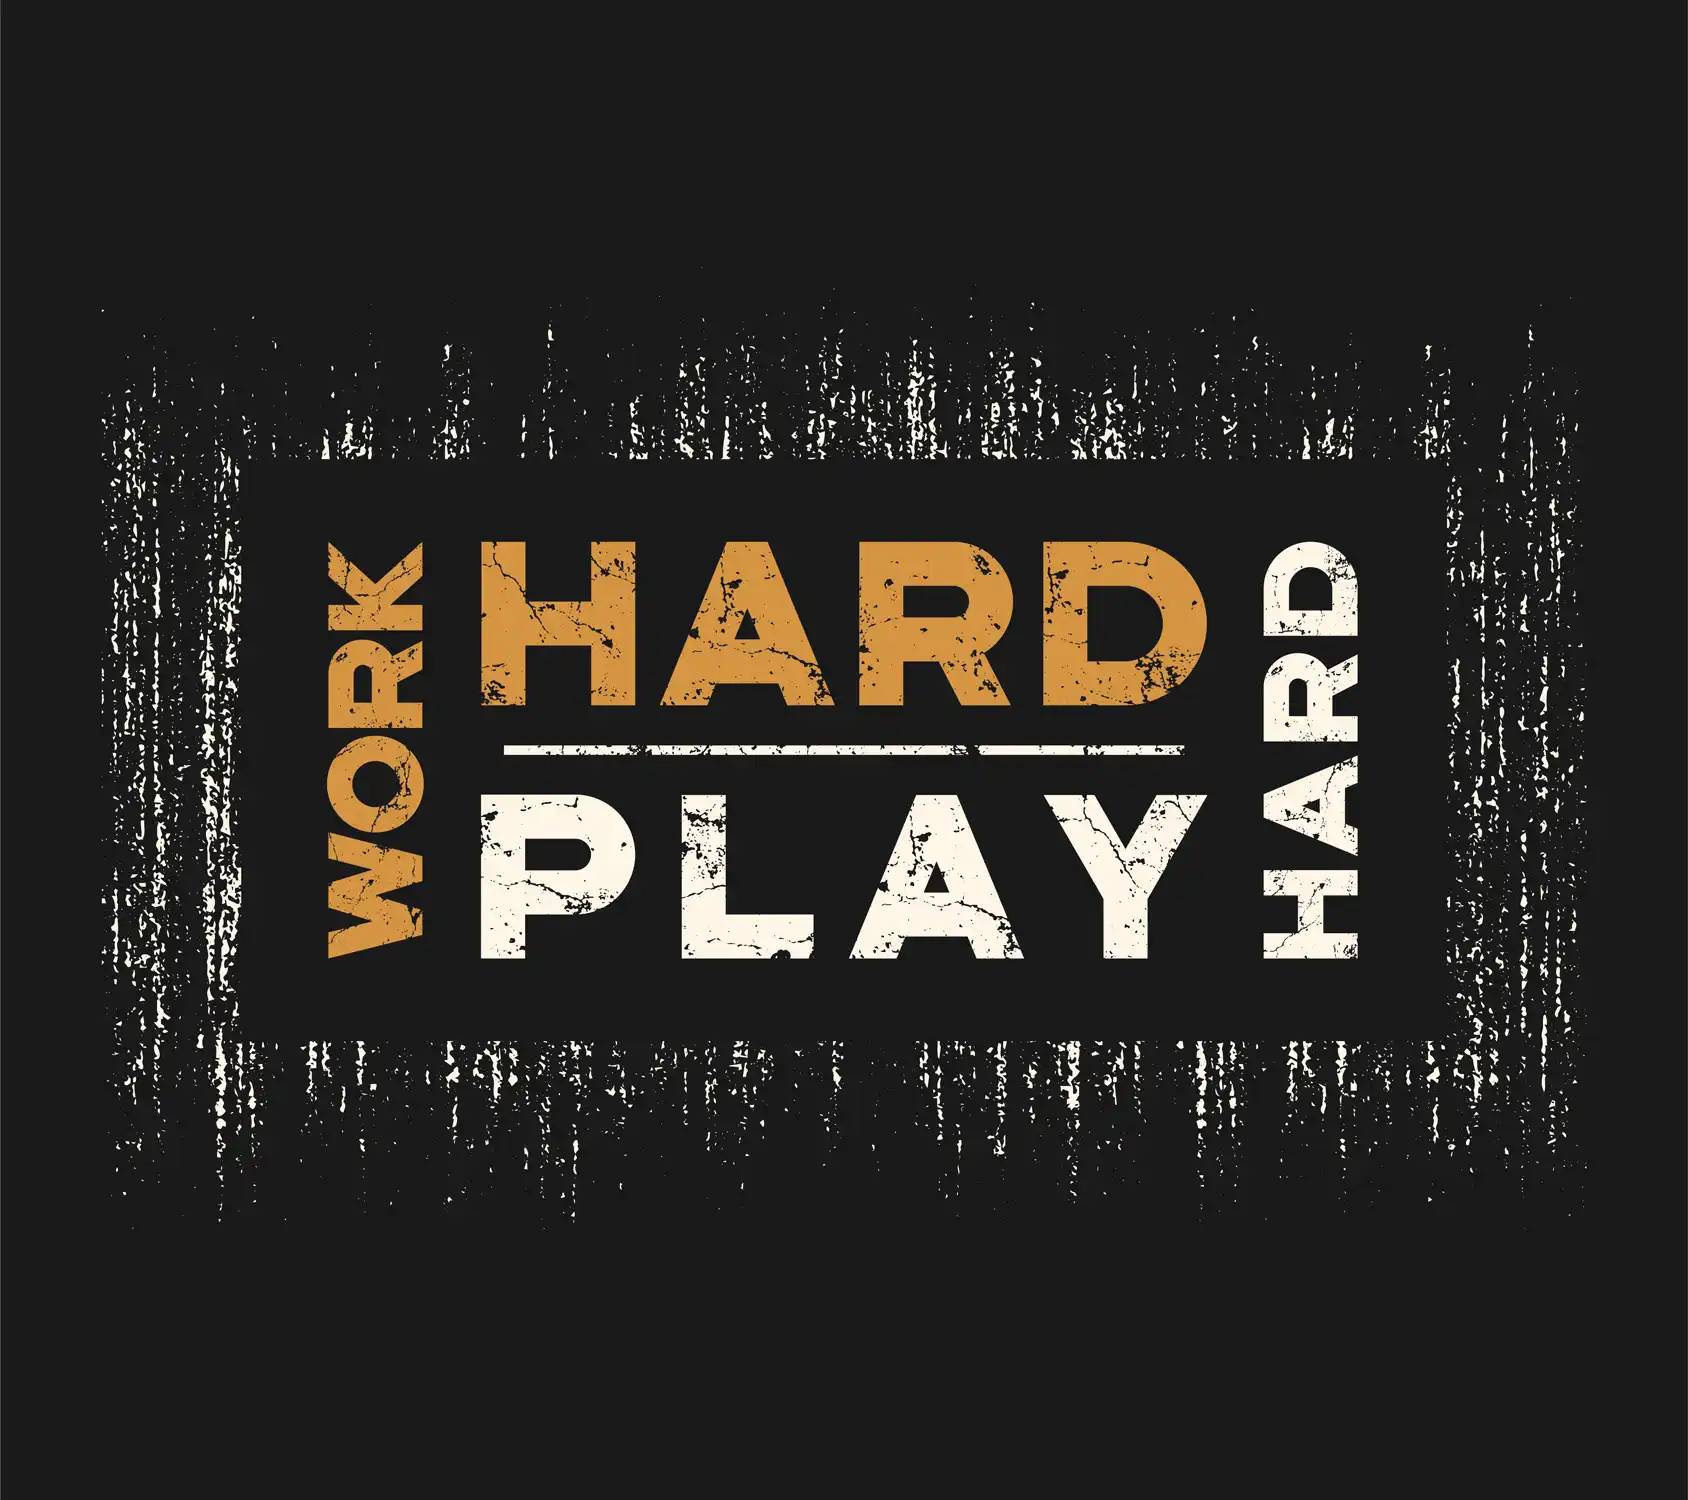 Header ‘Work hard, play hard: that’s the key to happiness for me.’